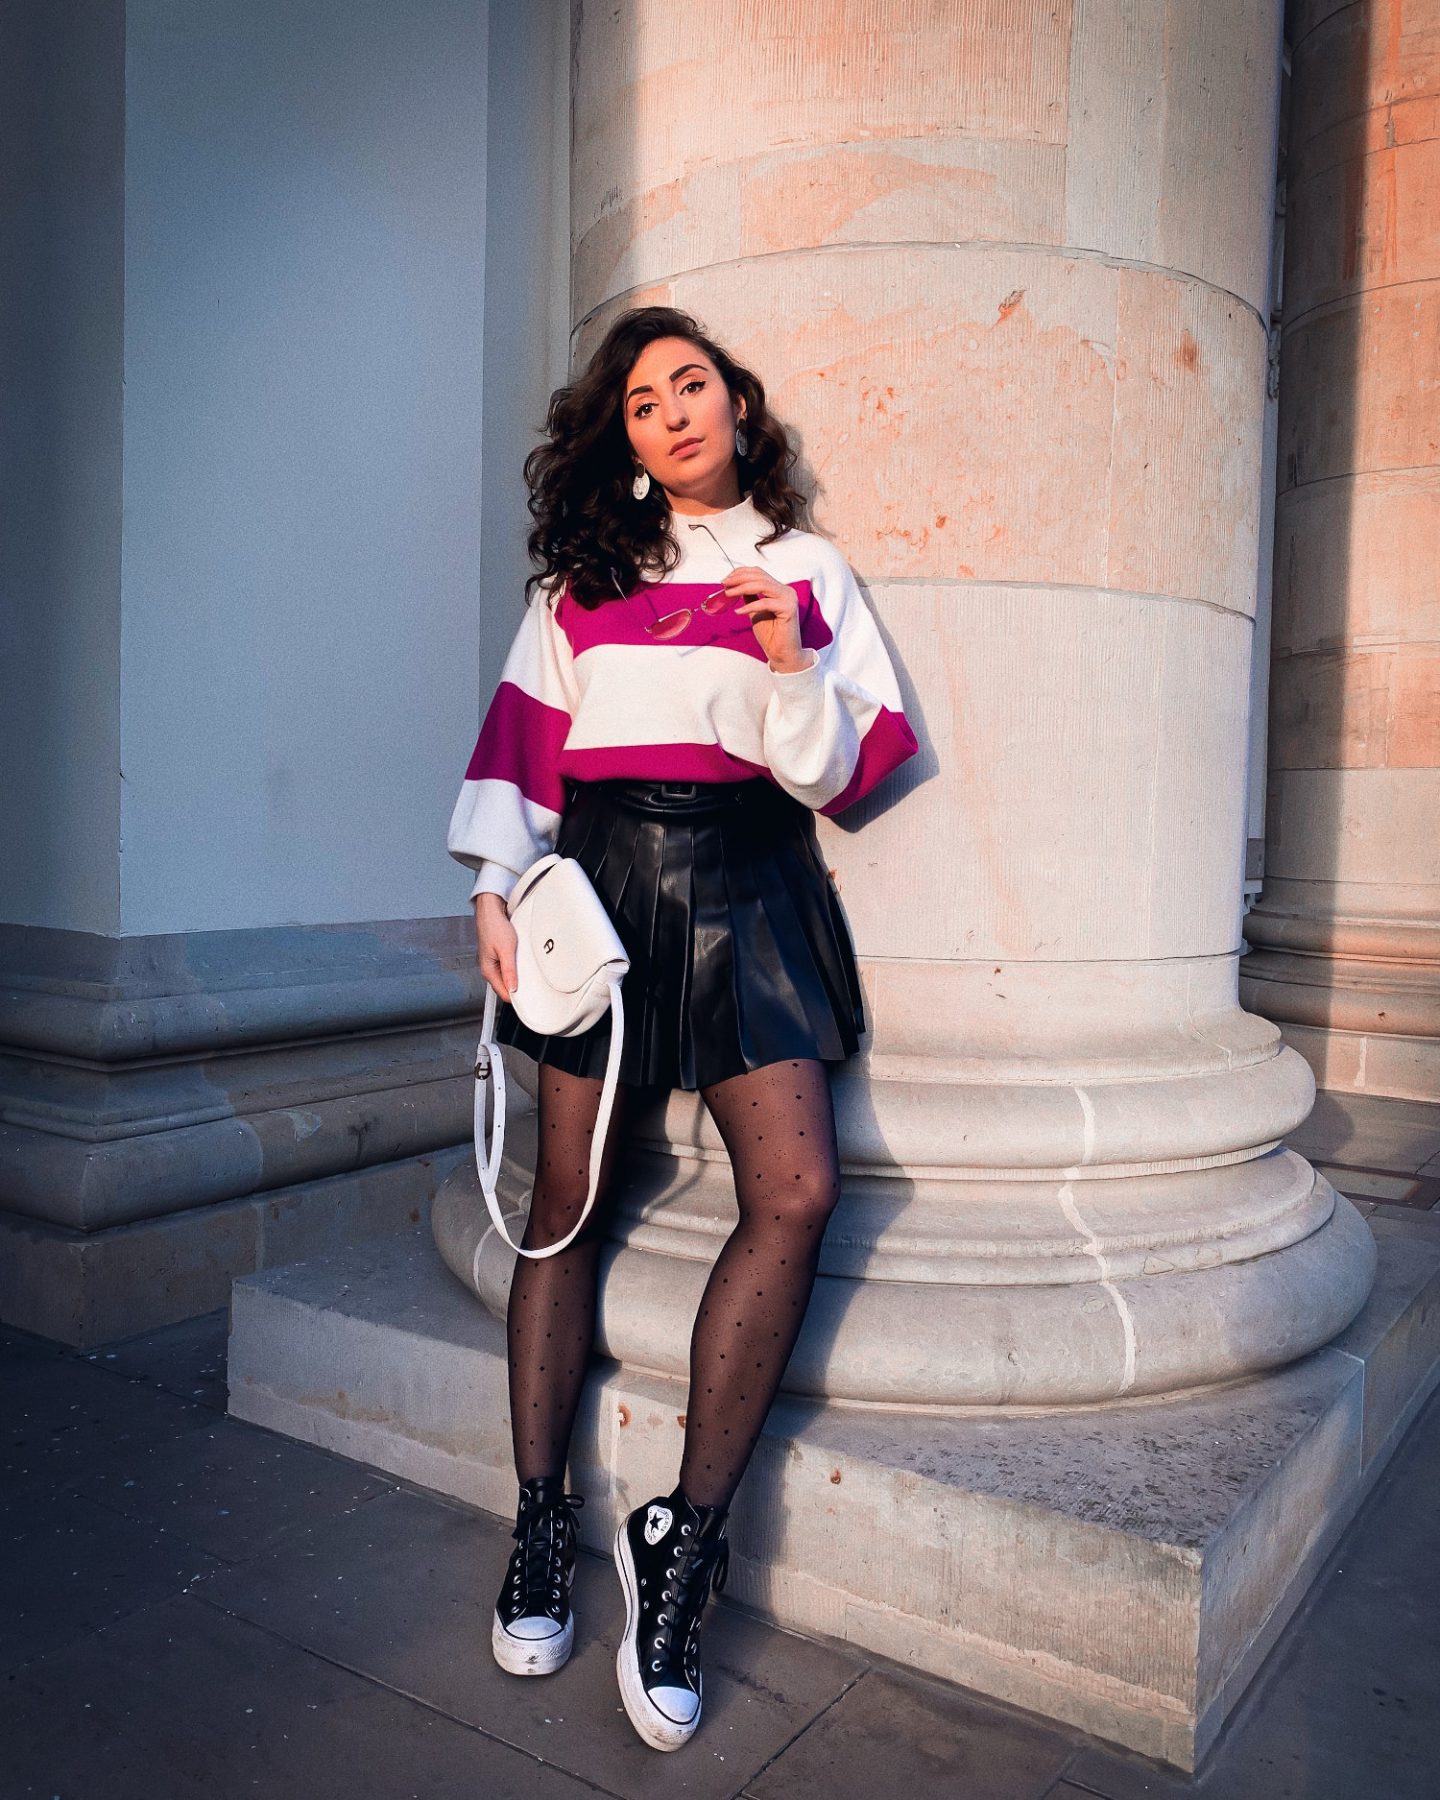 Spring Outfit Inspiration 2020 Fashion Blog berlin Zara Leather Skirt Puff Sleeves hm circile